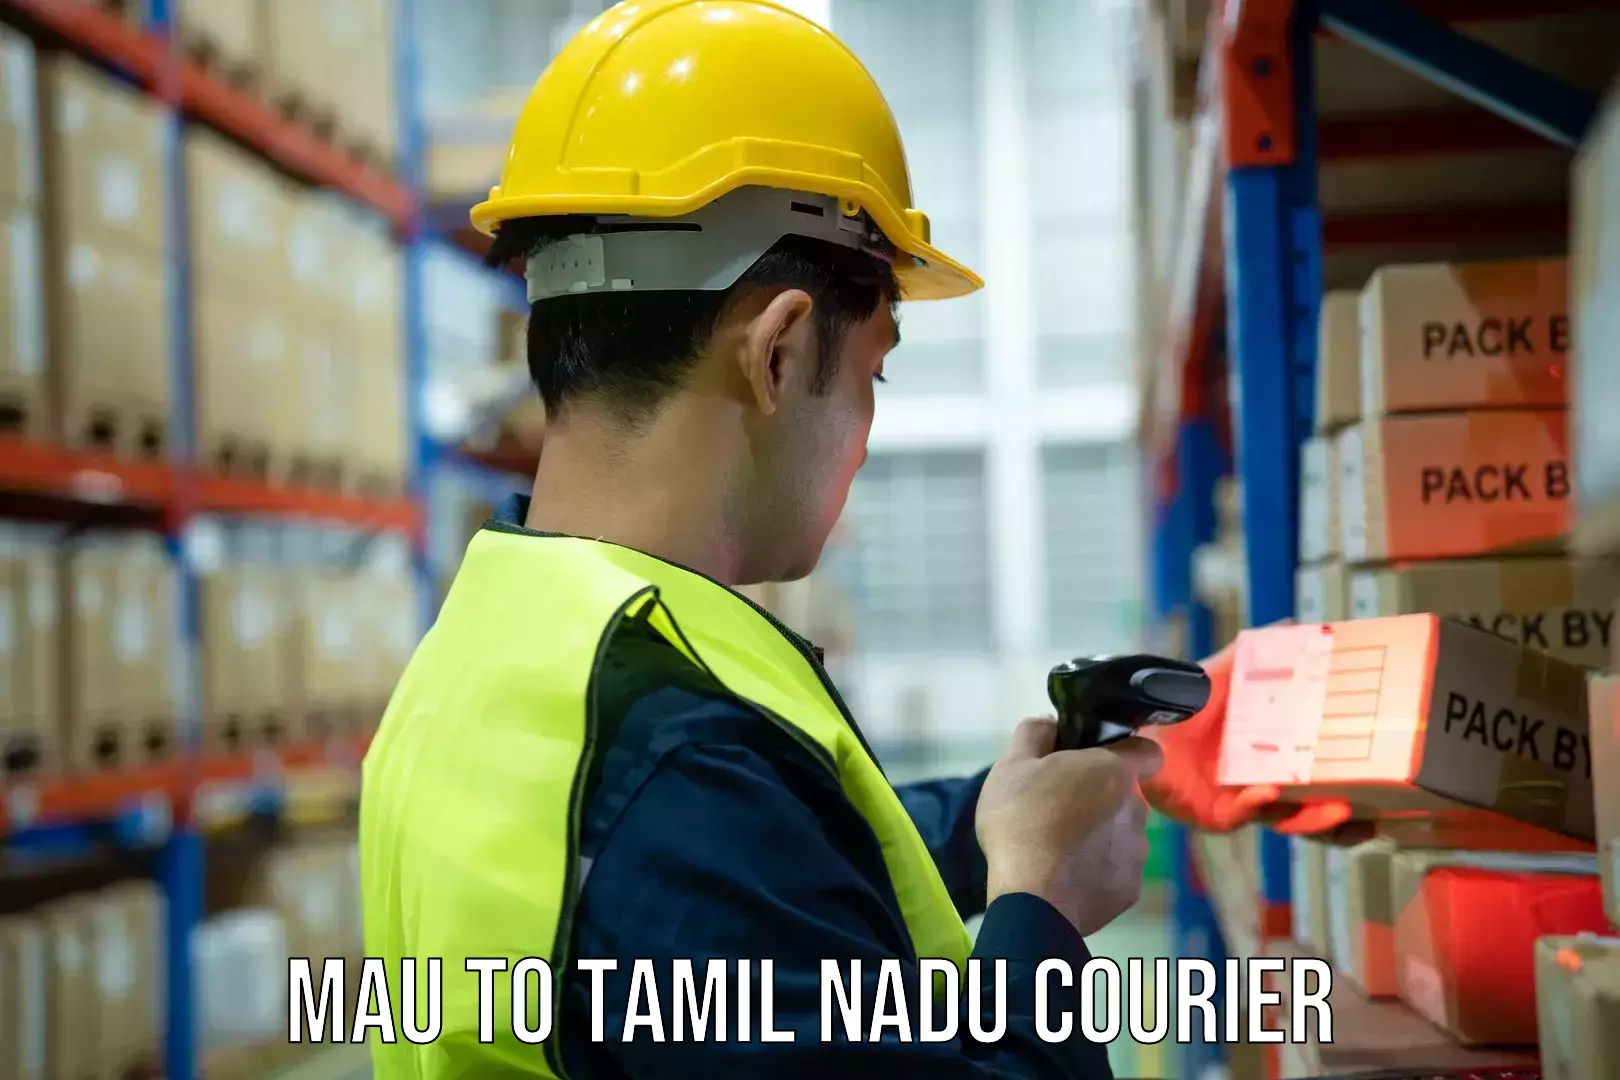 Fast delivery service Mau to Tamil Nadu